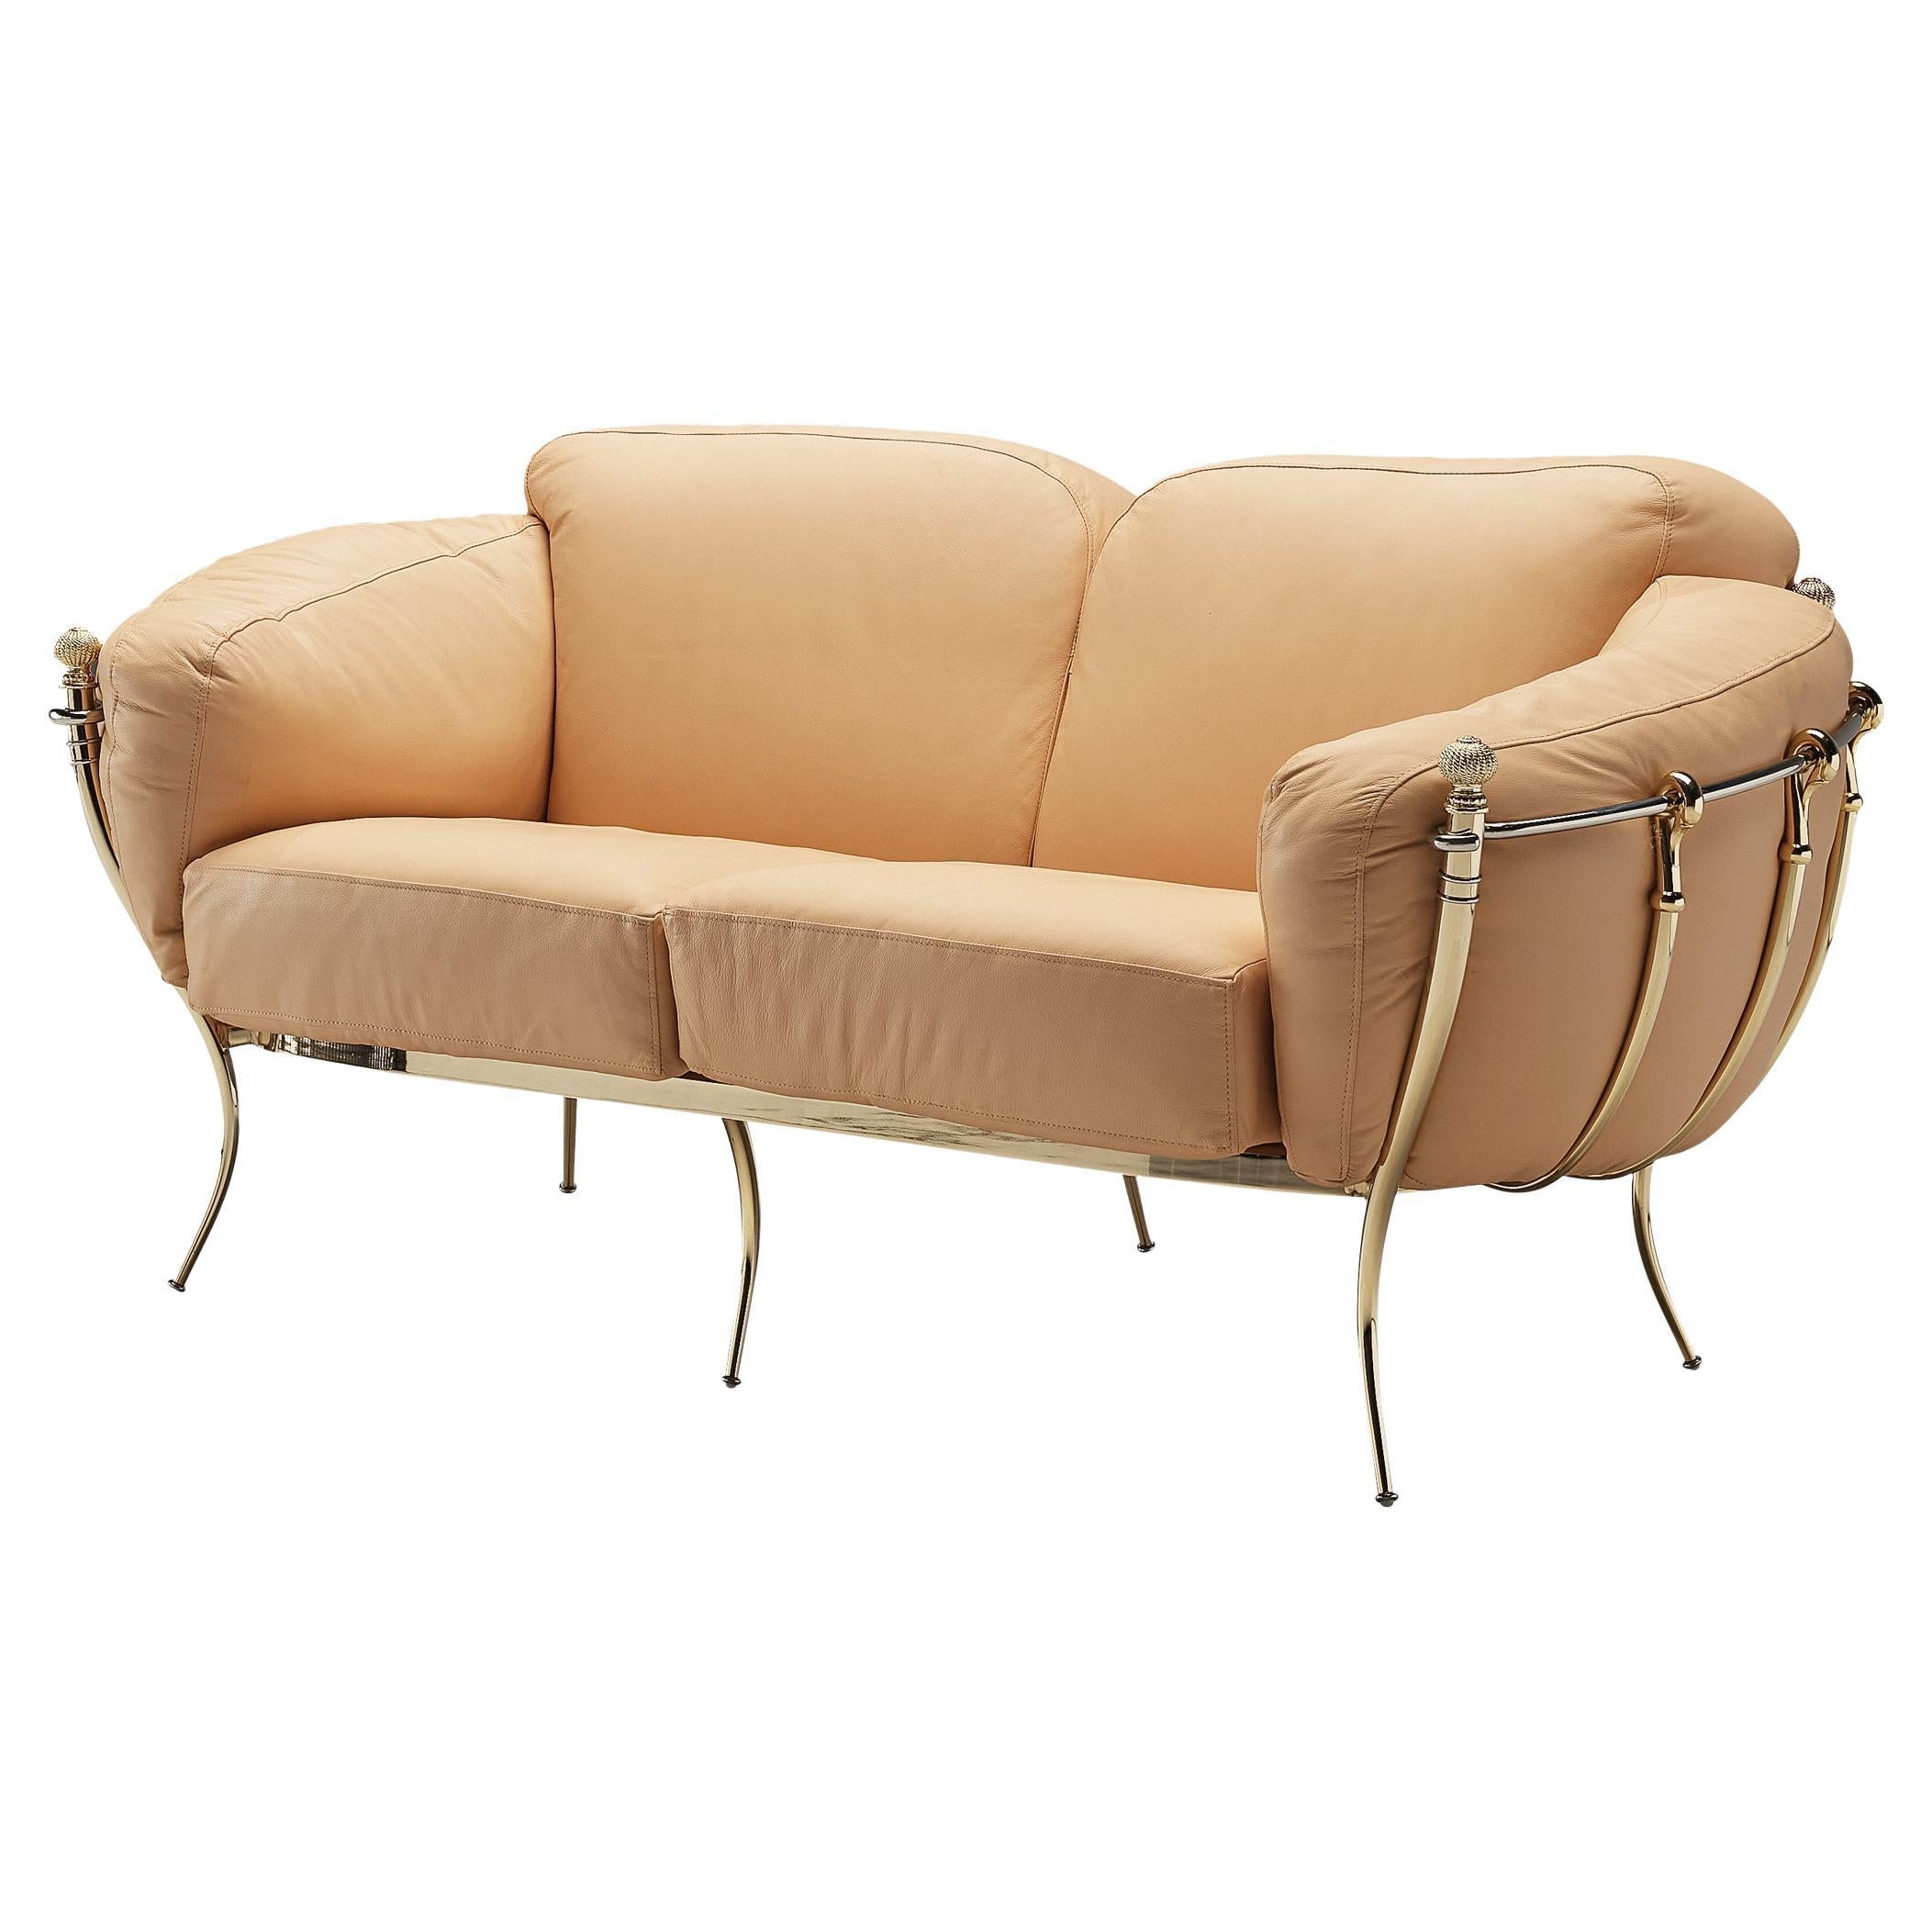 Spanish Sofa in Peach Leather and Brass For Sale